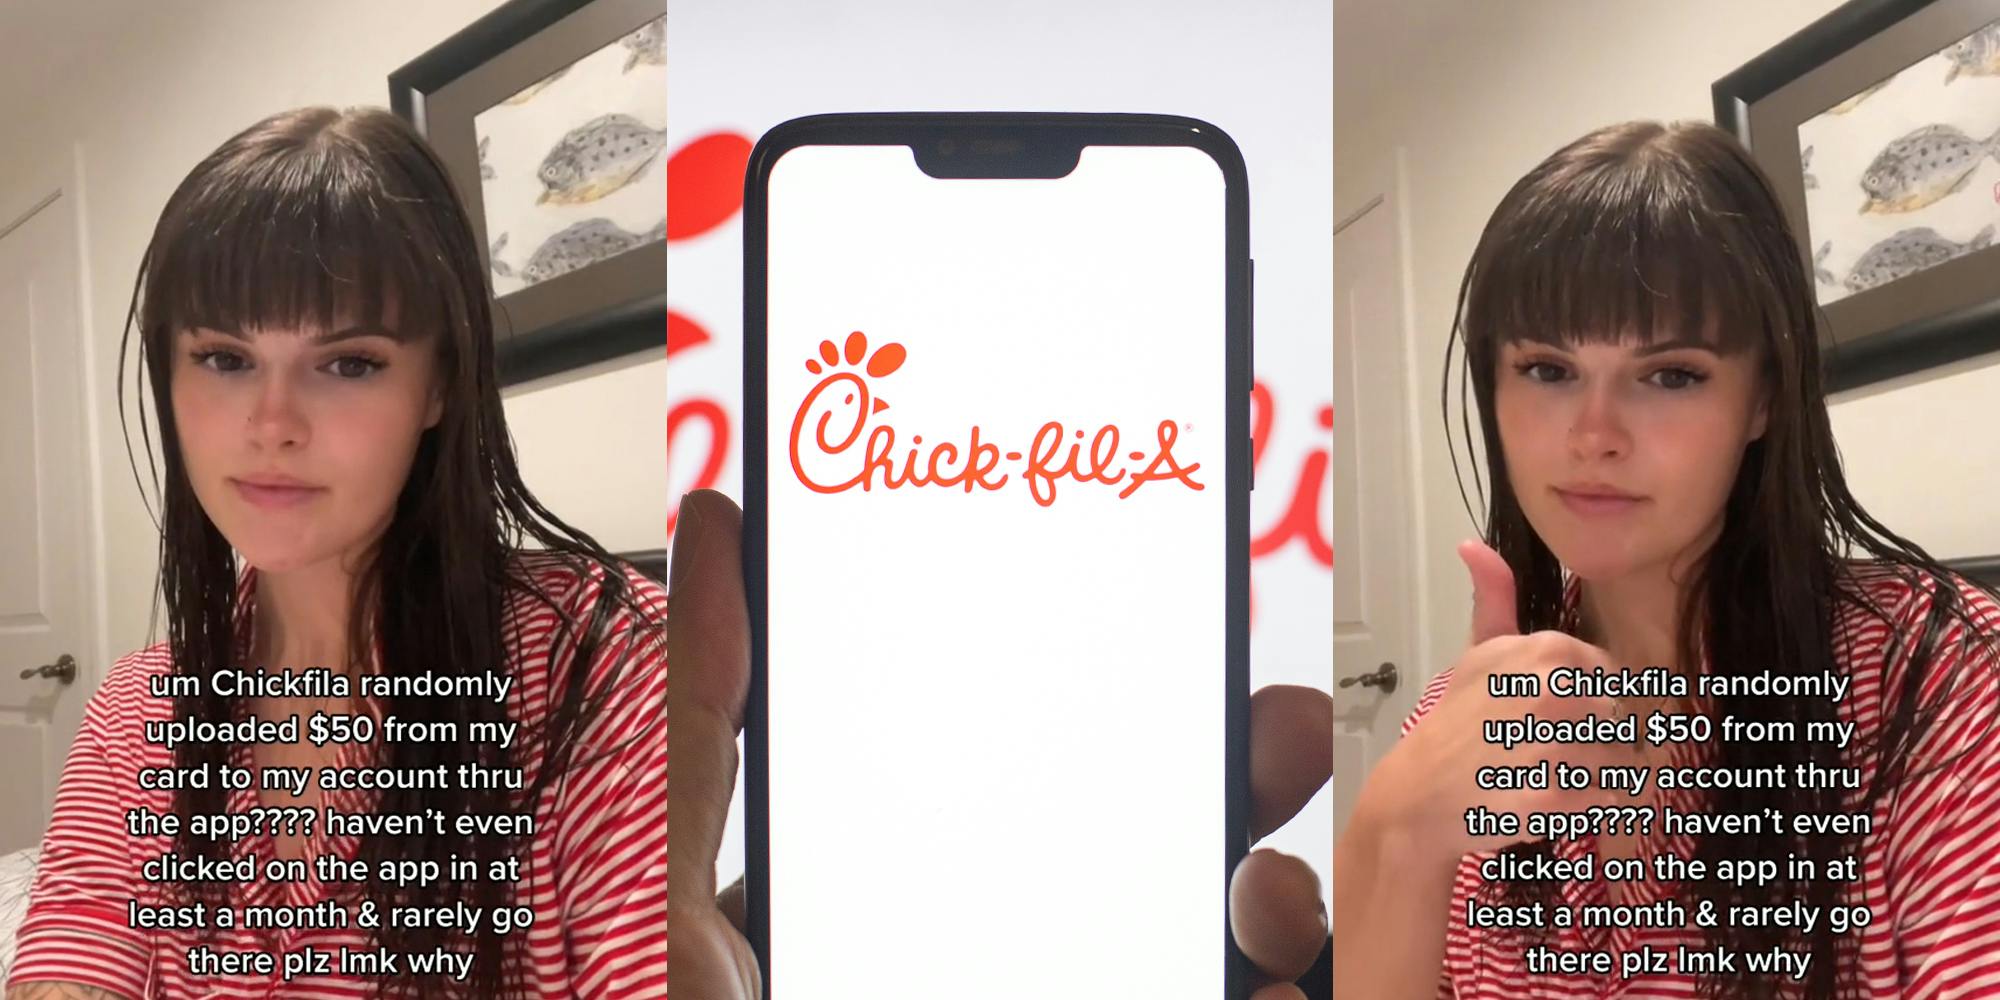 woman with caption "um Chickfila randomly uploaded $50 from my card to my account thru the app??? haven't even clicked on the app in at least a month & rarely go there plz lmk why" (l) Chick-Fil-A on phone in hand in front of white and red background (c) woman with thumb up with caption "um Chickfila randomly uploaded $50 from my card to my account thru the app??? haven't even clicked on the app in at least a month & rarely go there plz lmk why" (r)